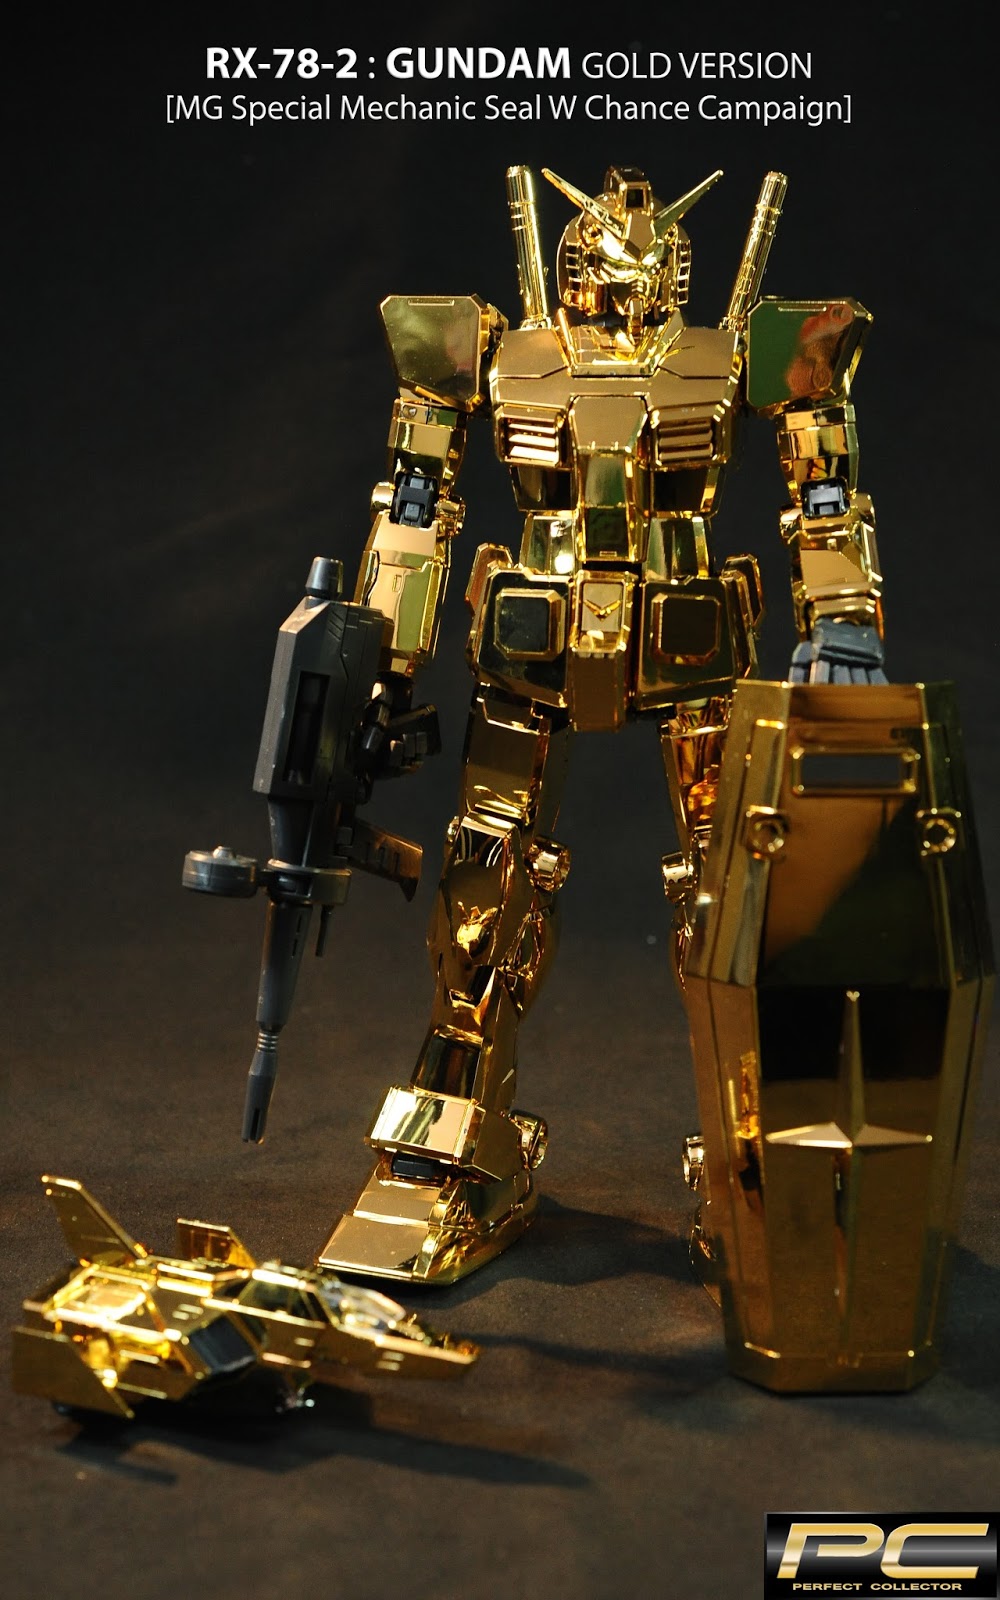 G リミテッド Gallery Video Pg Rx 78 2 Gundam Gold Version Mobile Suit Gundam Limited Edition Gundam Model Kits And Figures